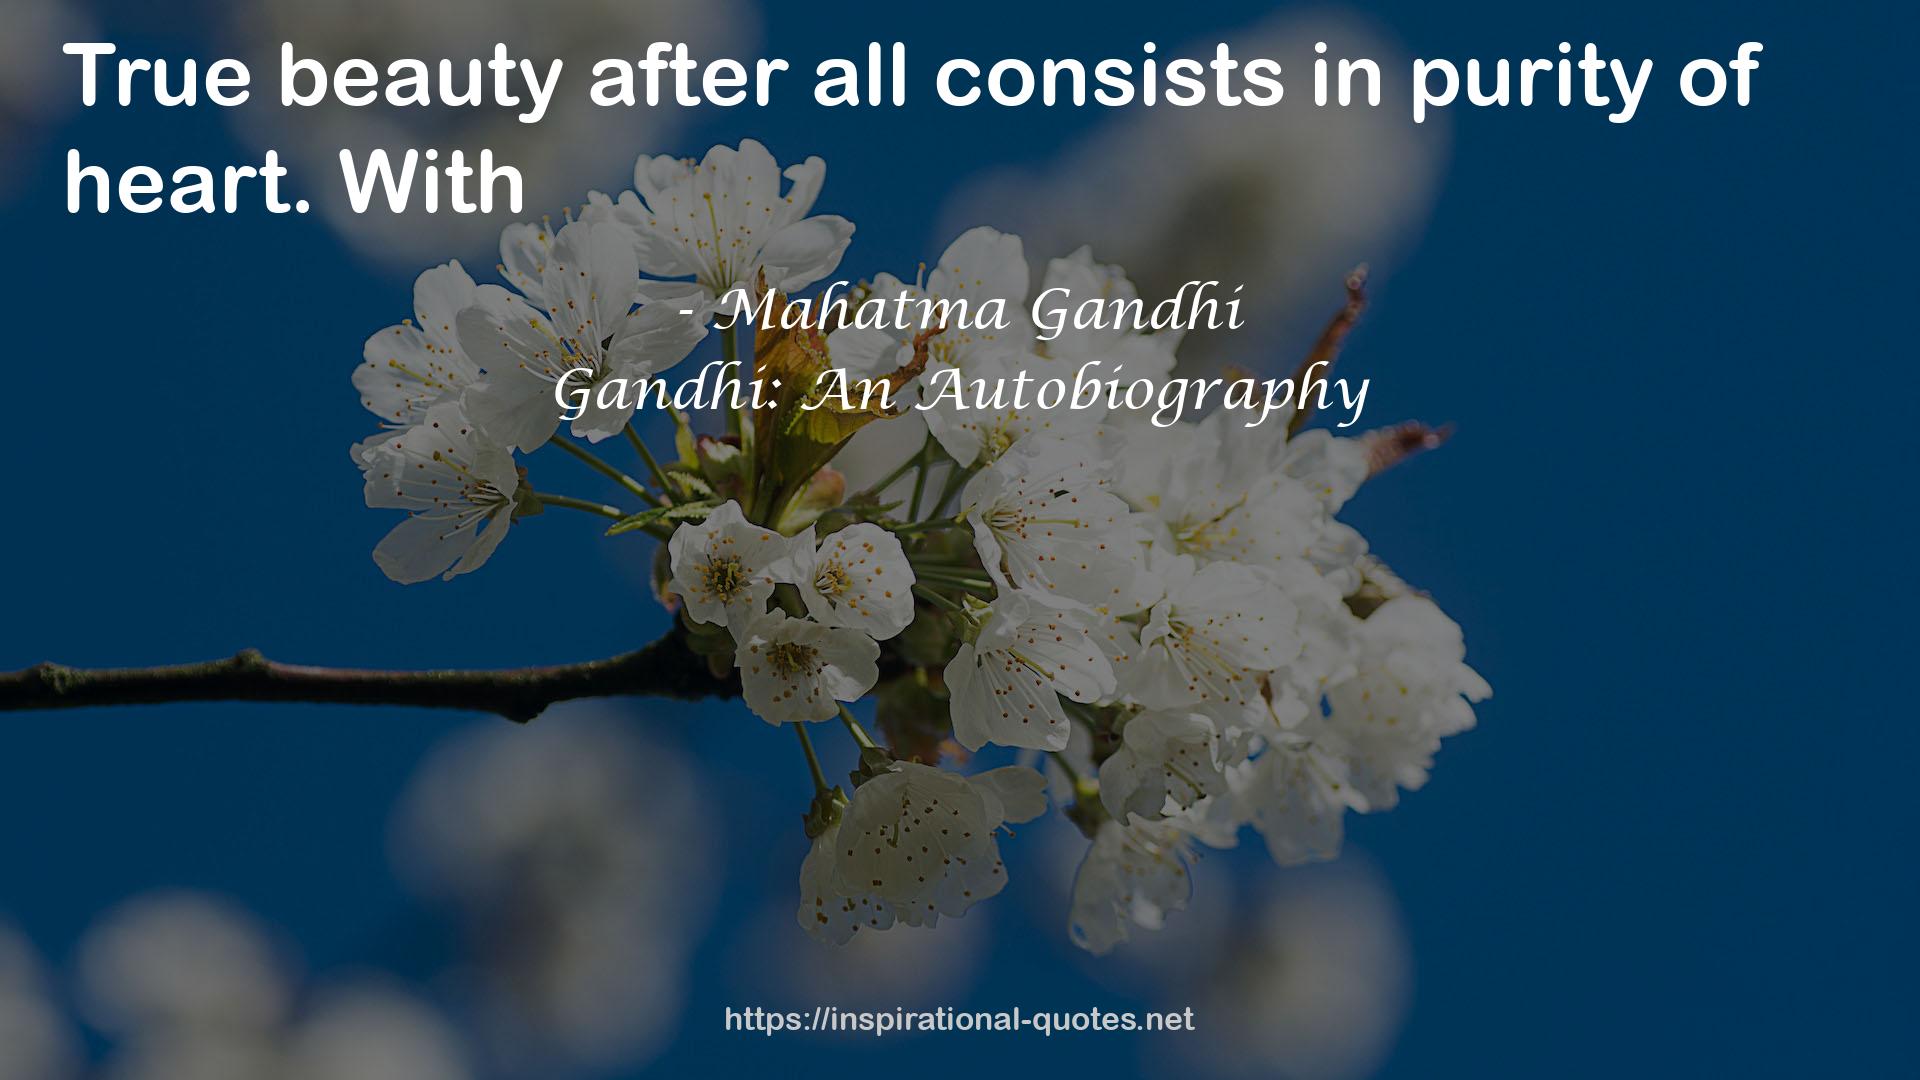 Gandhi: An Autobiography QUOTES